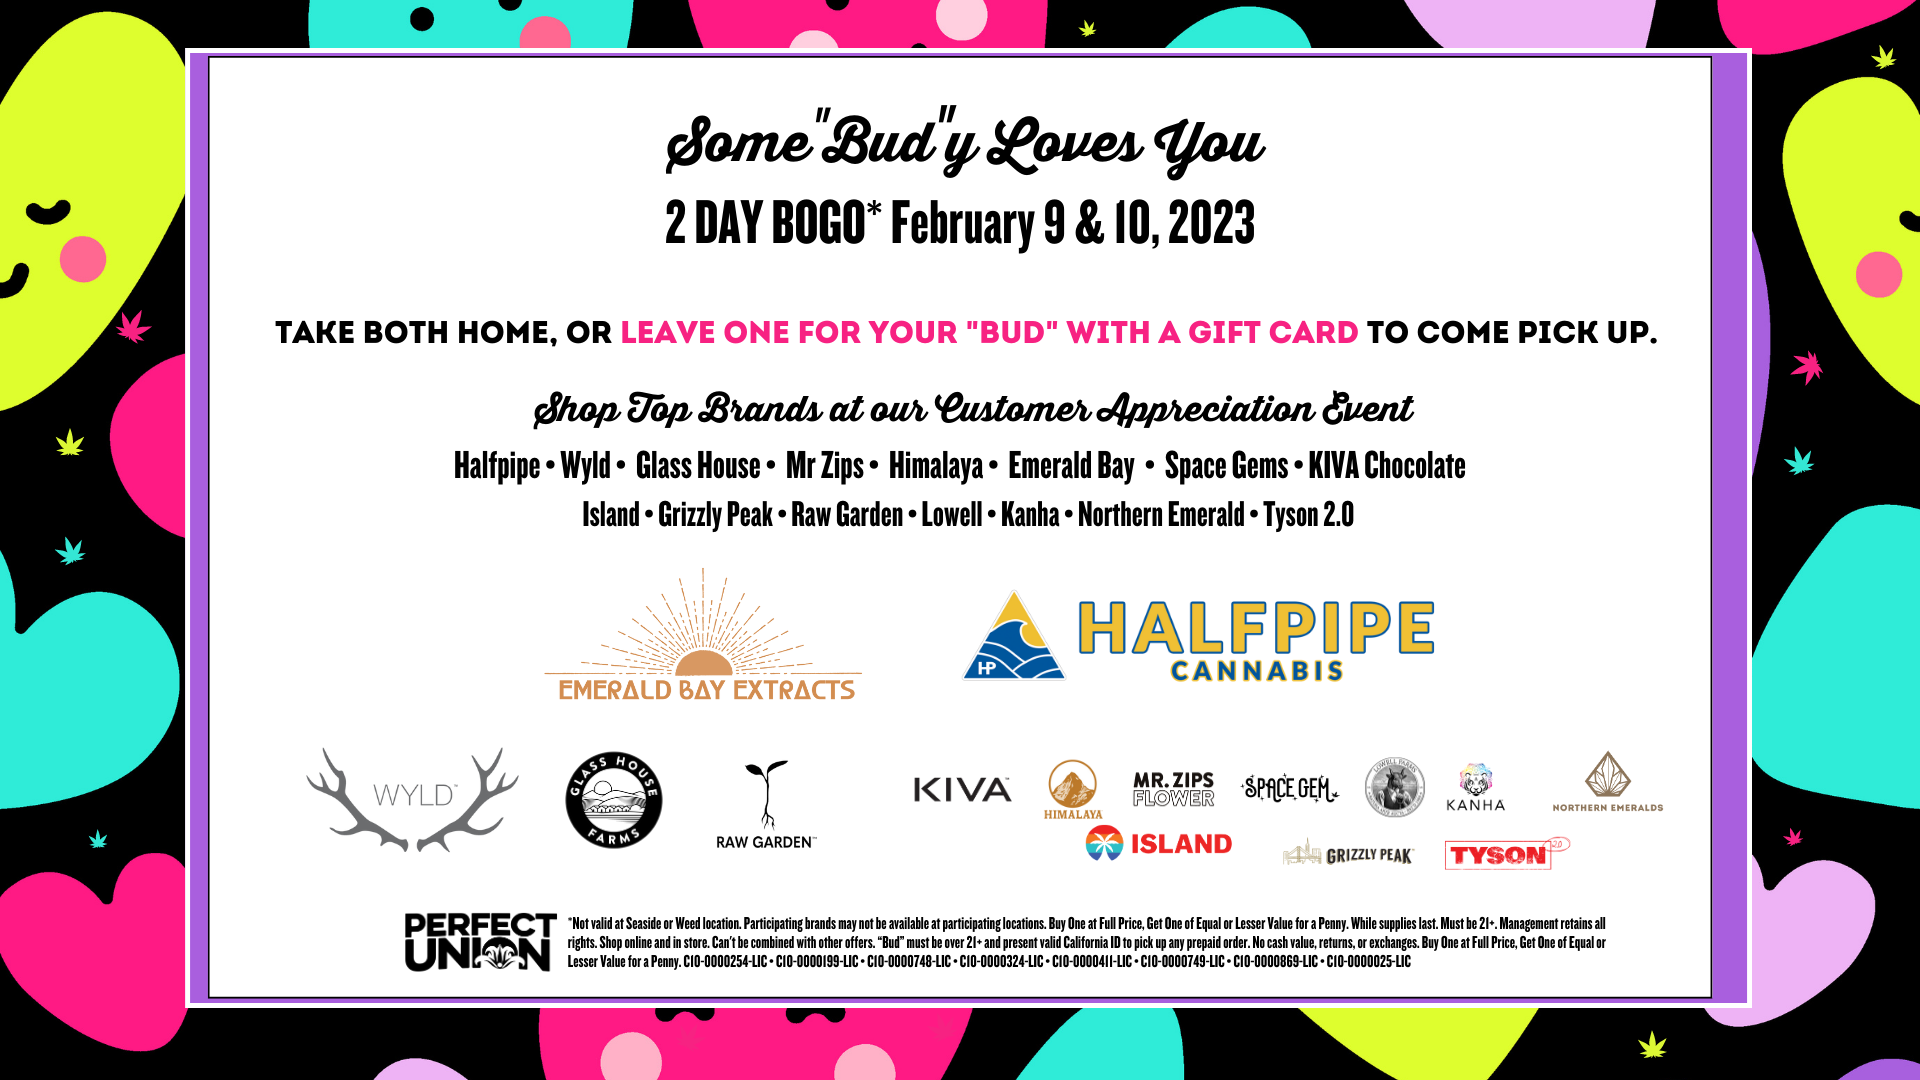 Somebudy loves you perfect union february 9 and 10, 2023 customer appreciation event